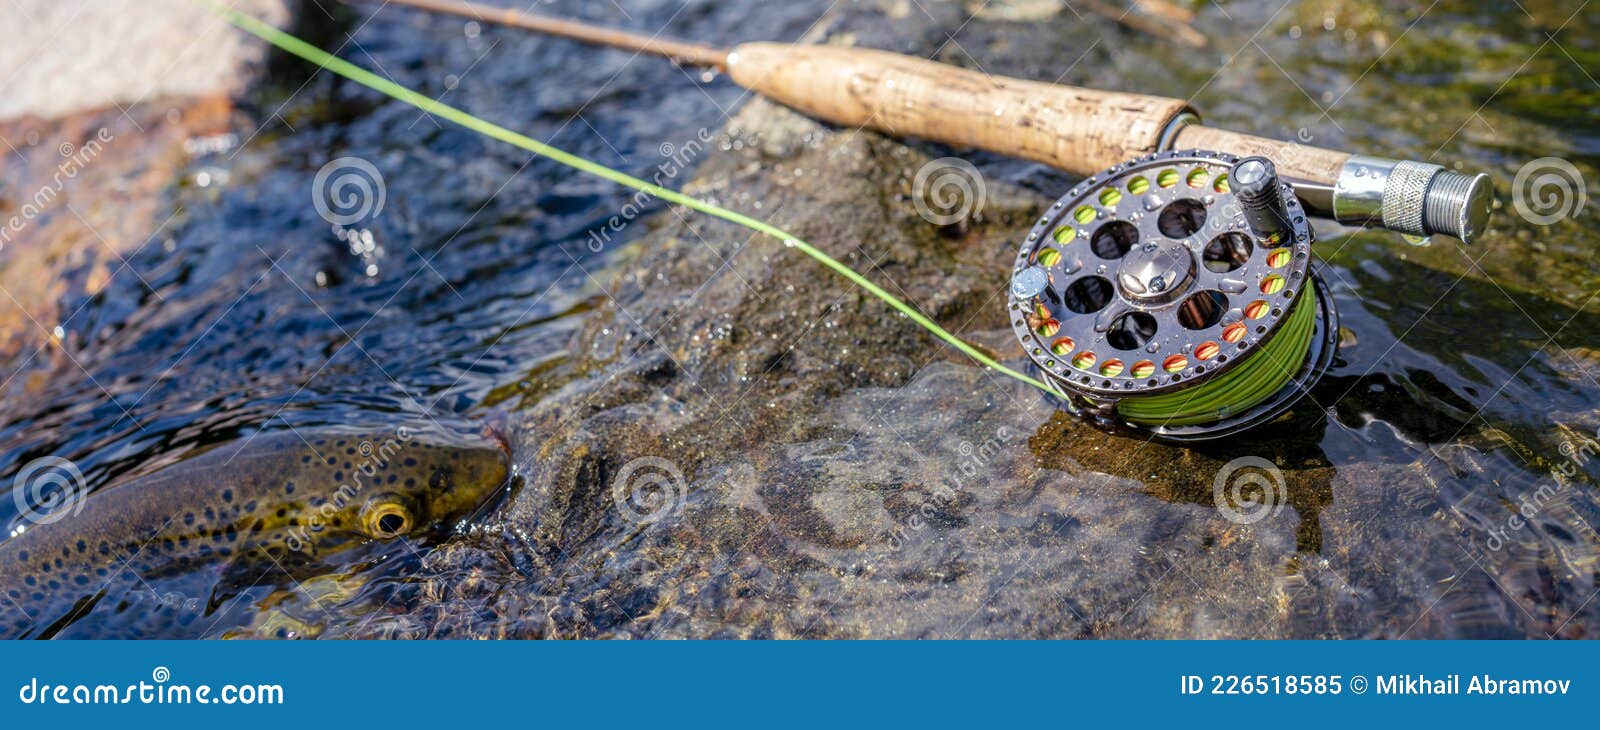 A Fly Fishing Rod and Reel on the River Bank. Trout Fishing. Stock Image -  Image of artificial, line: 226518585